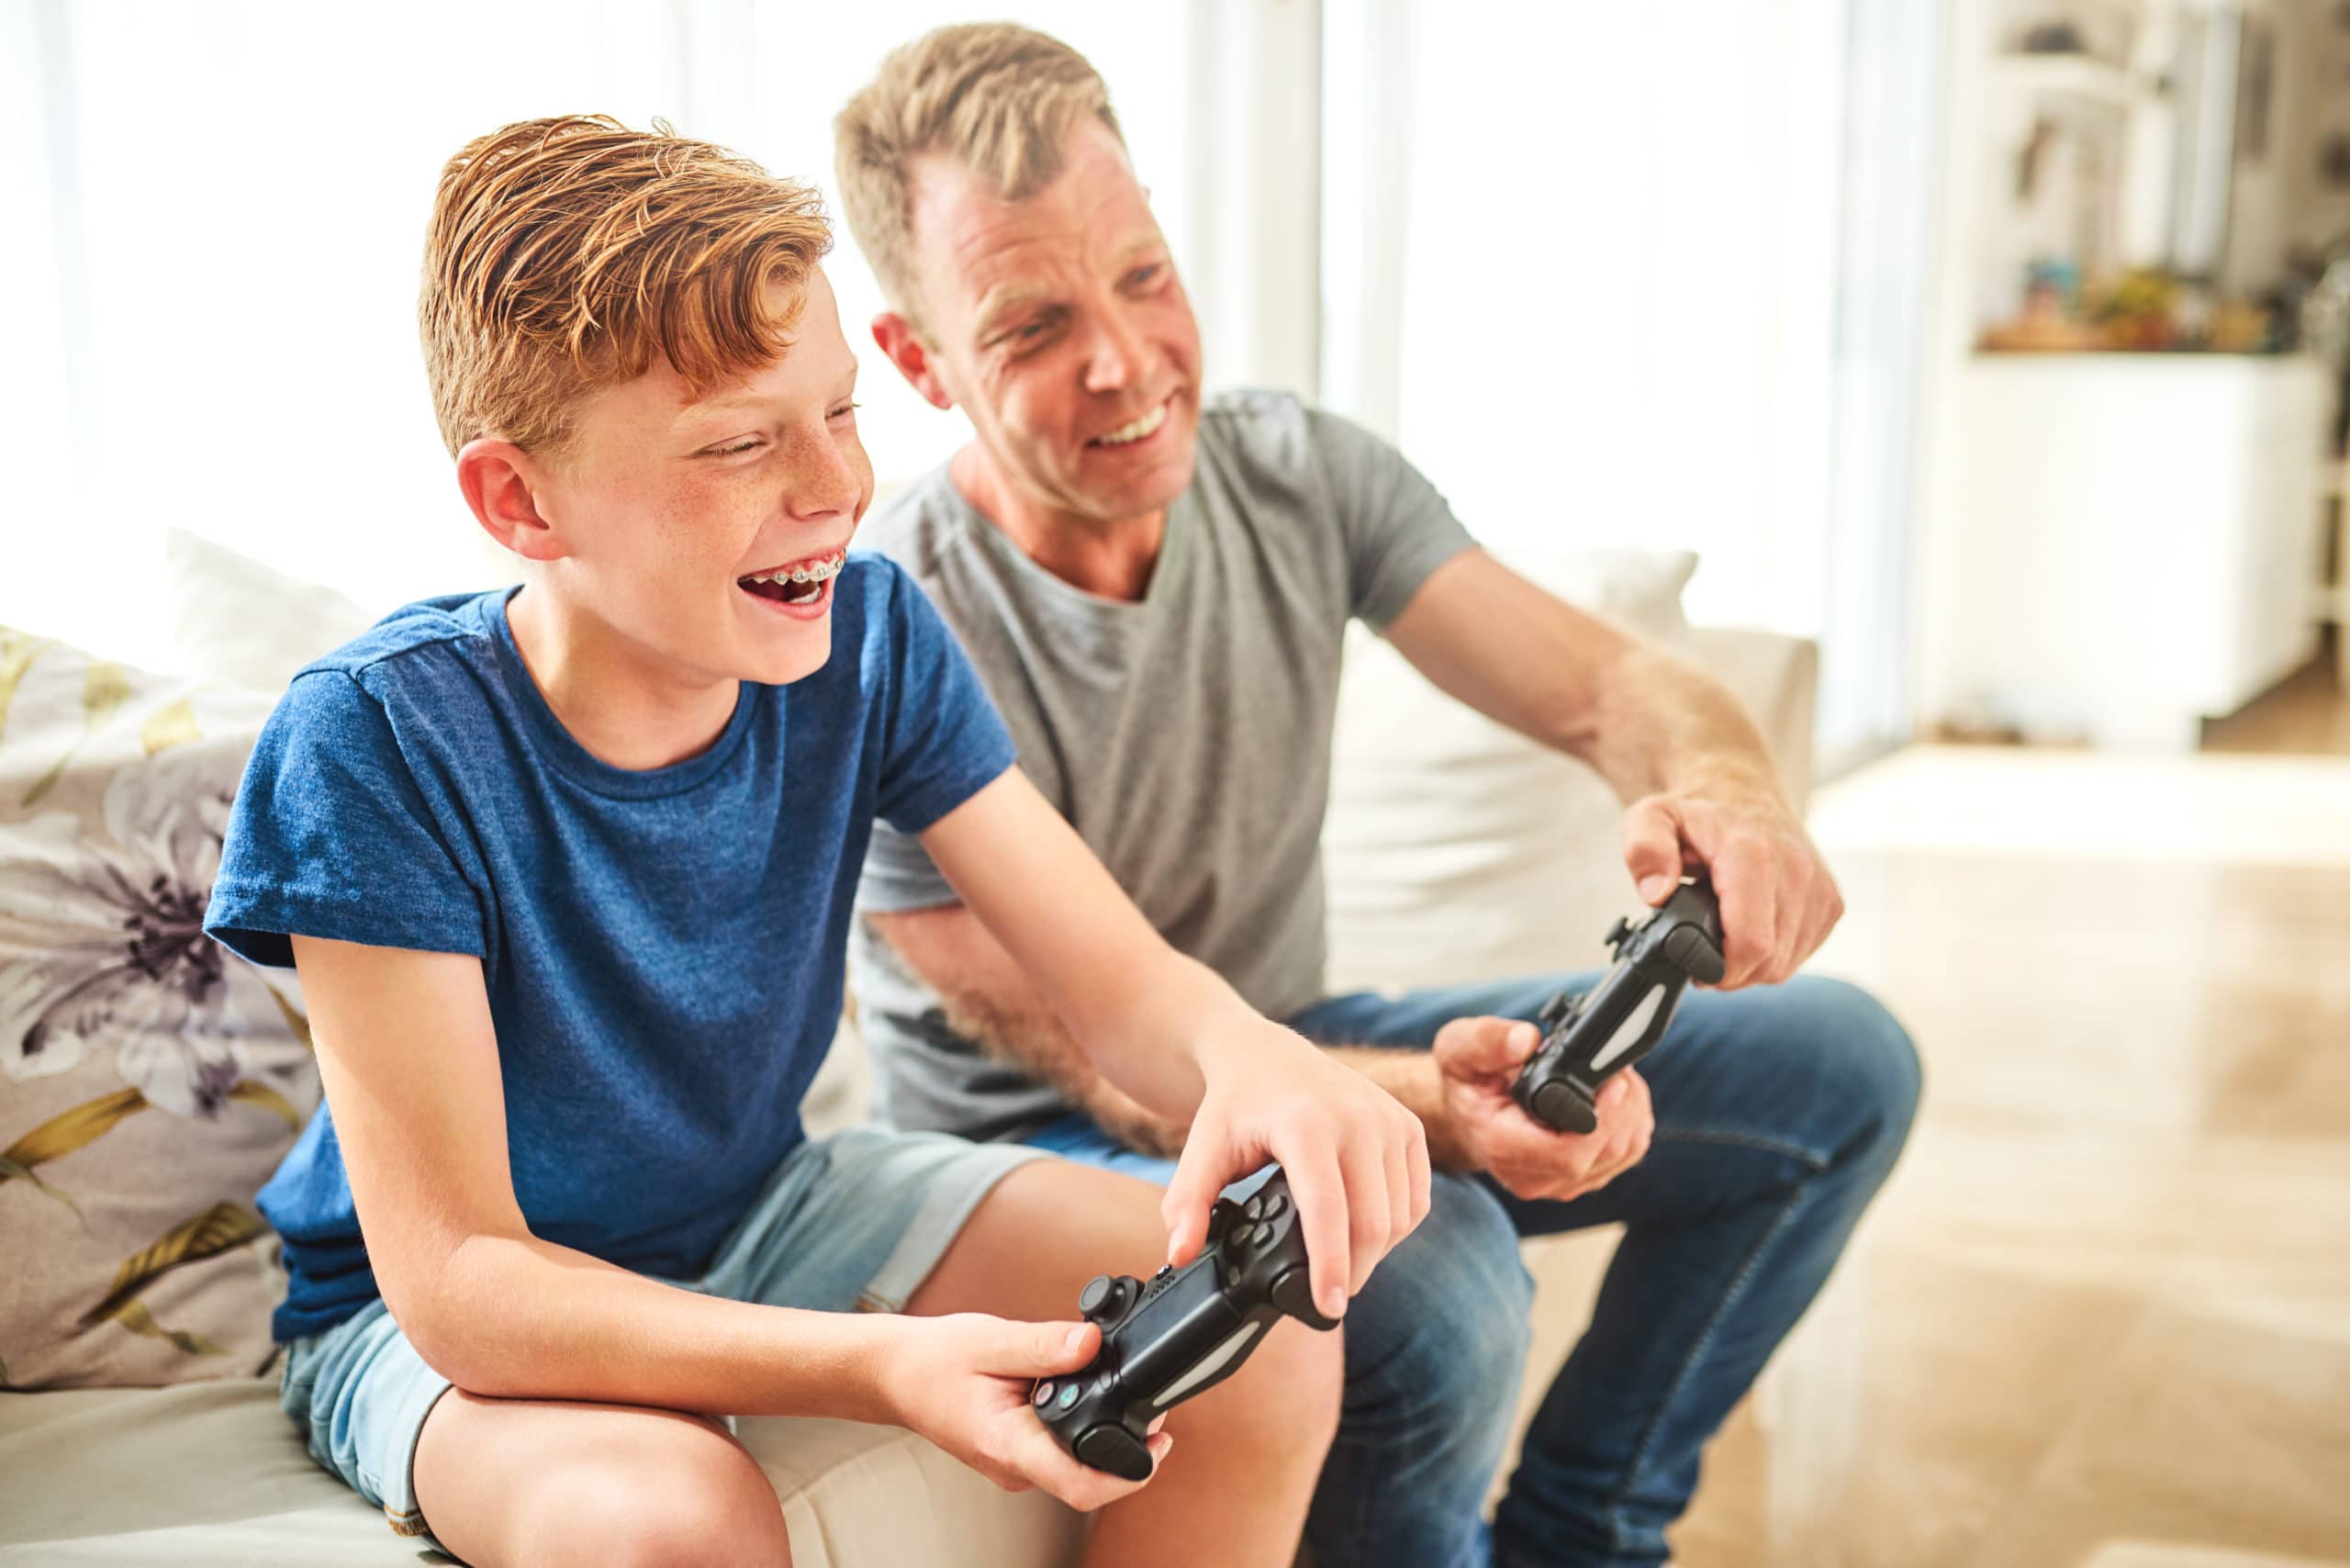 A young boy with braces playing video games with his dad.